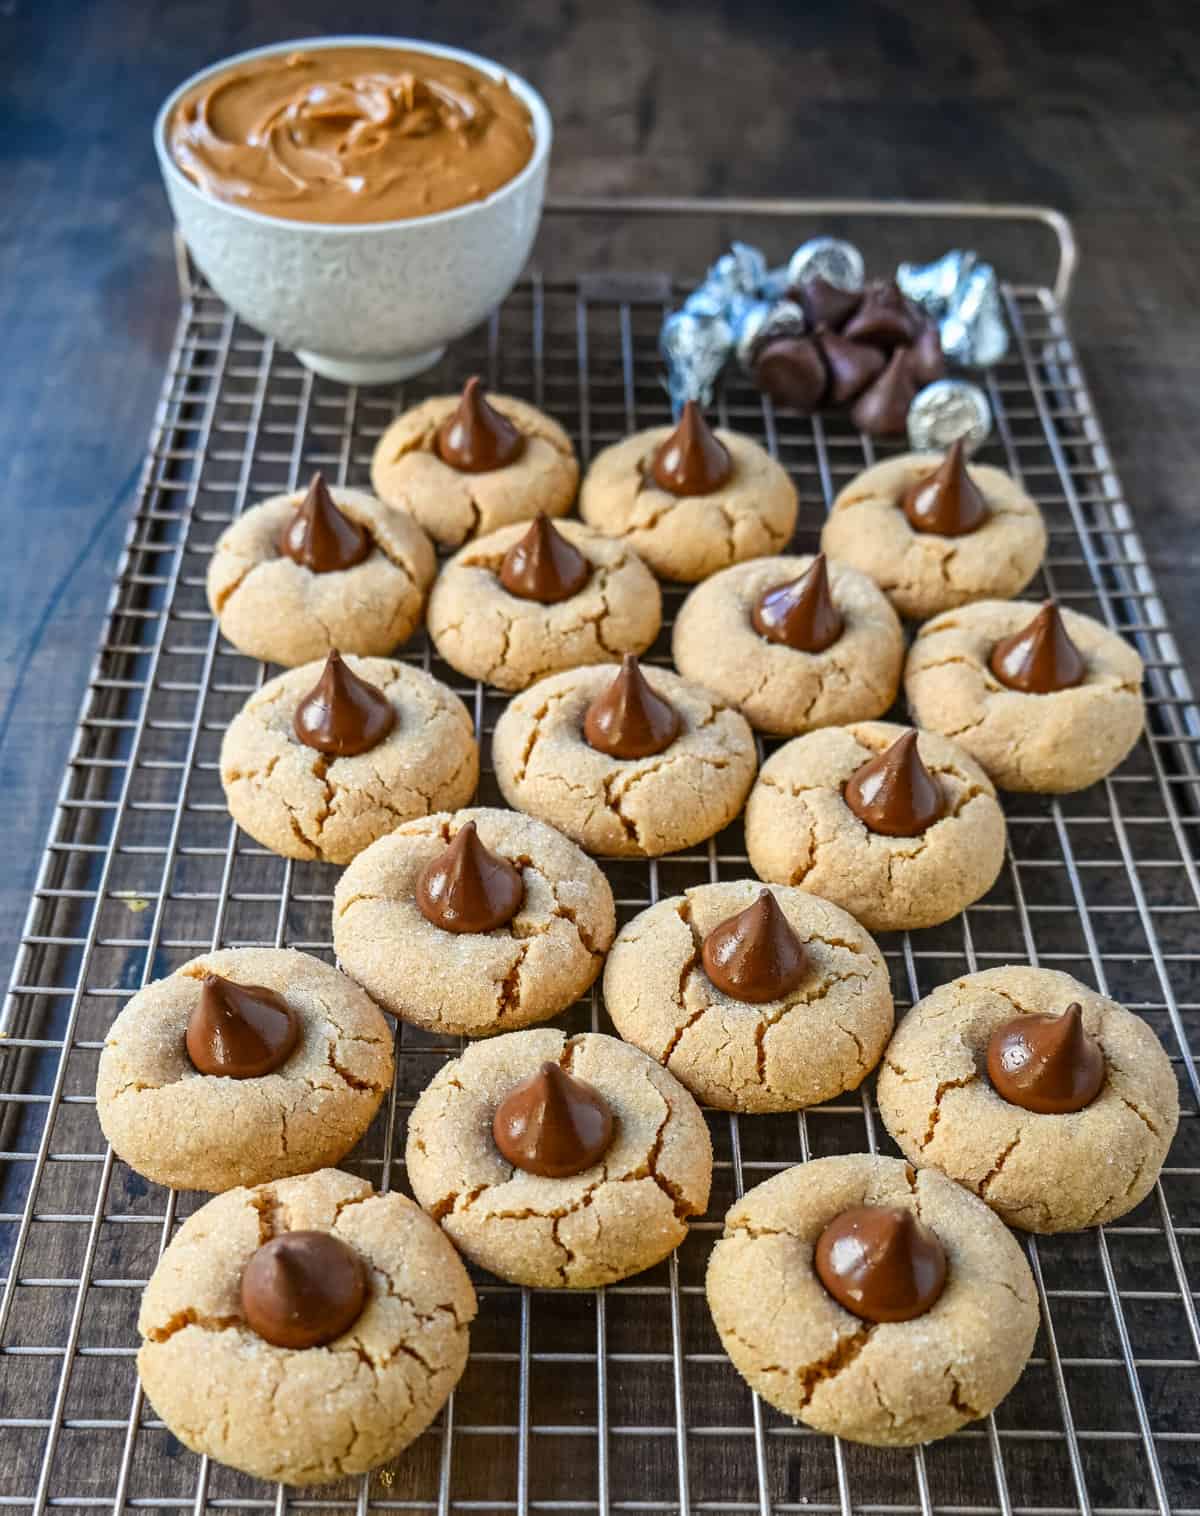 Easy Peanut Butter Blossoms. This popular soft and chewy peanut butter cookie with a Hershey's chocolate kiss in the center is the classic Christmas cookie. This recipe has been in my family for over 60 years and is the best peanut butter blossom recipe.